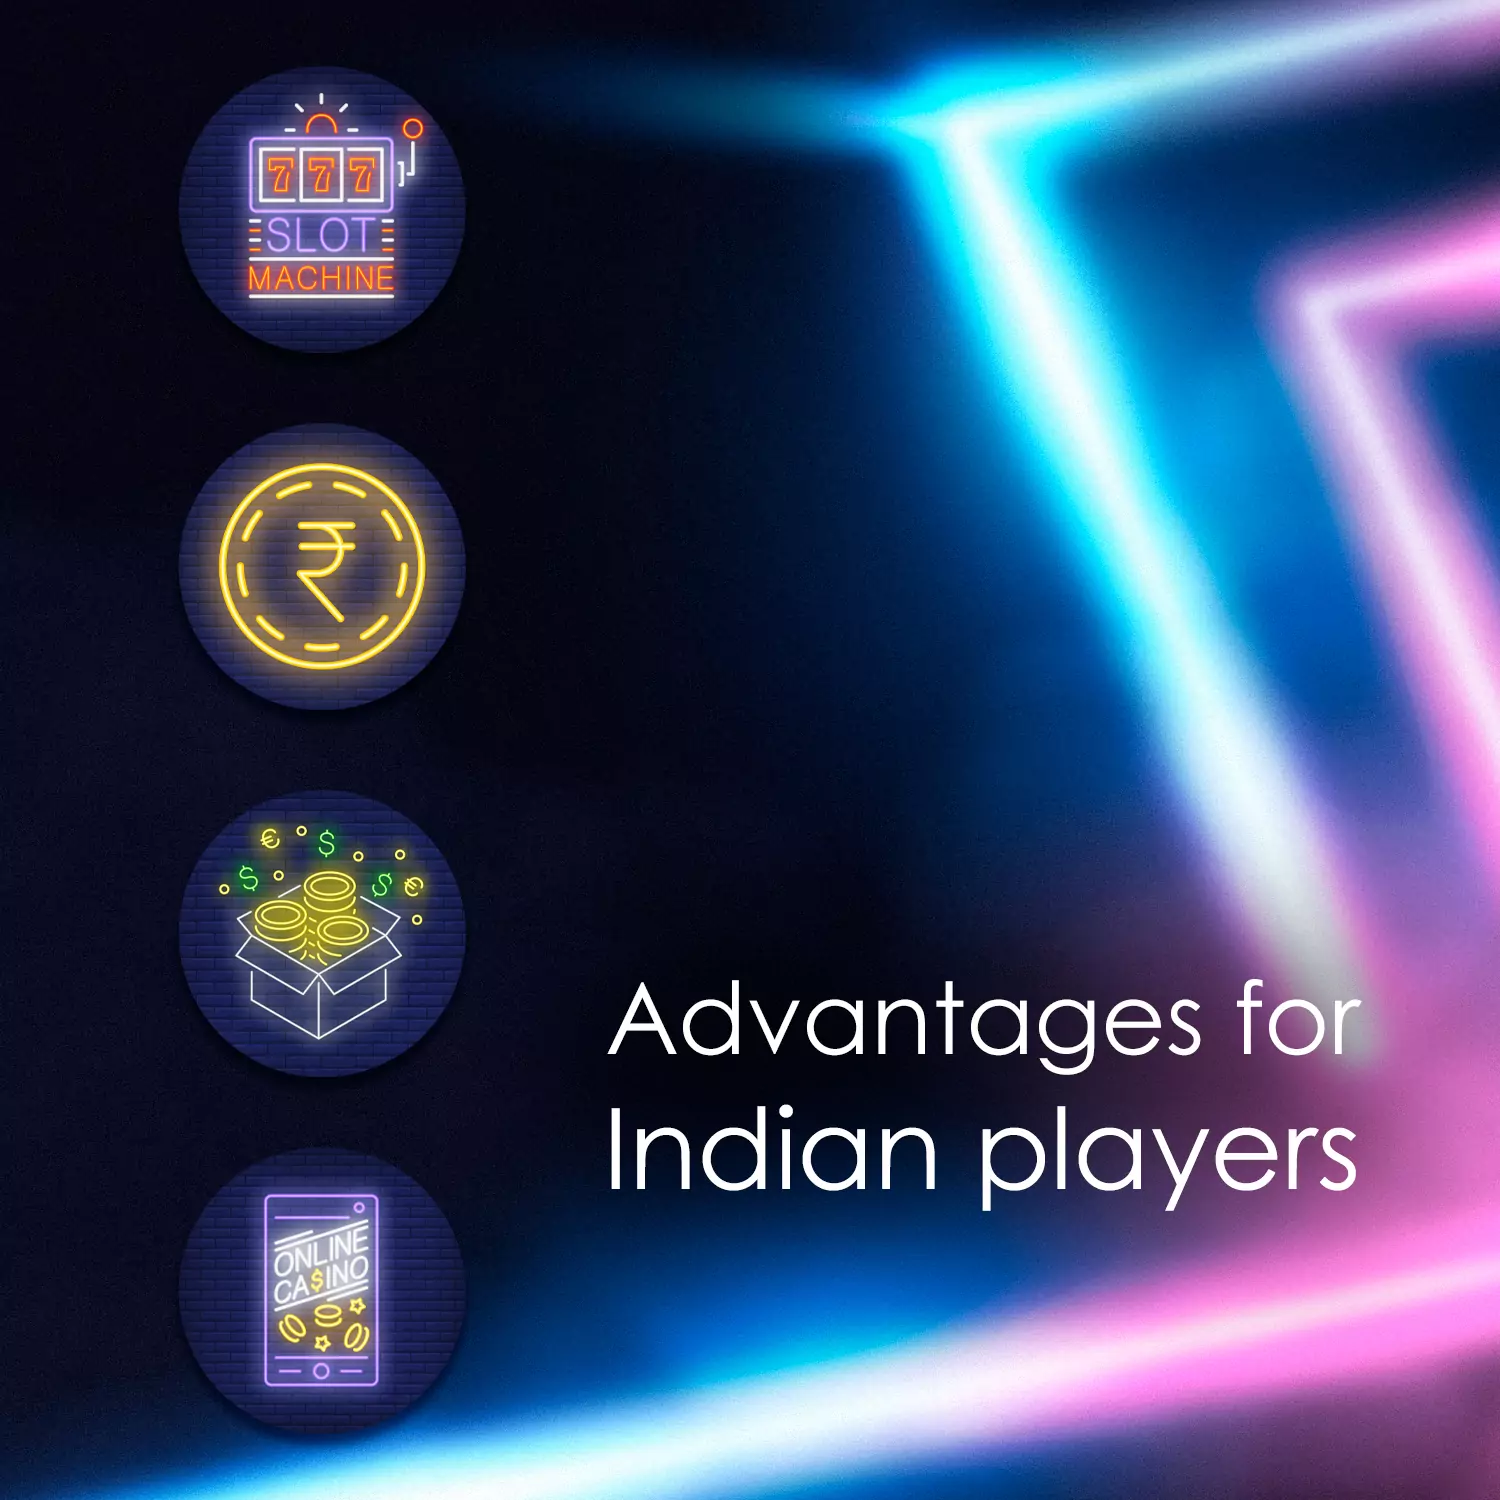 In comparison to other bookmaker office sites, there are lots of advantages for Indian players on the Pin-up site.